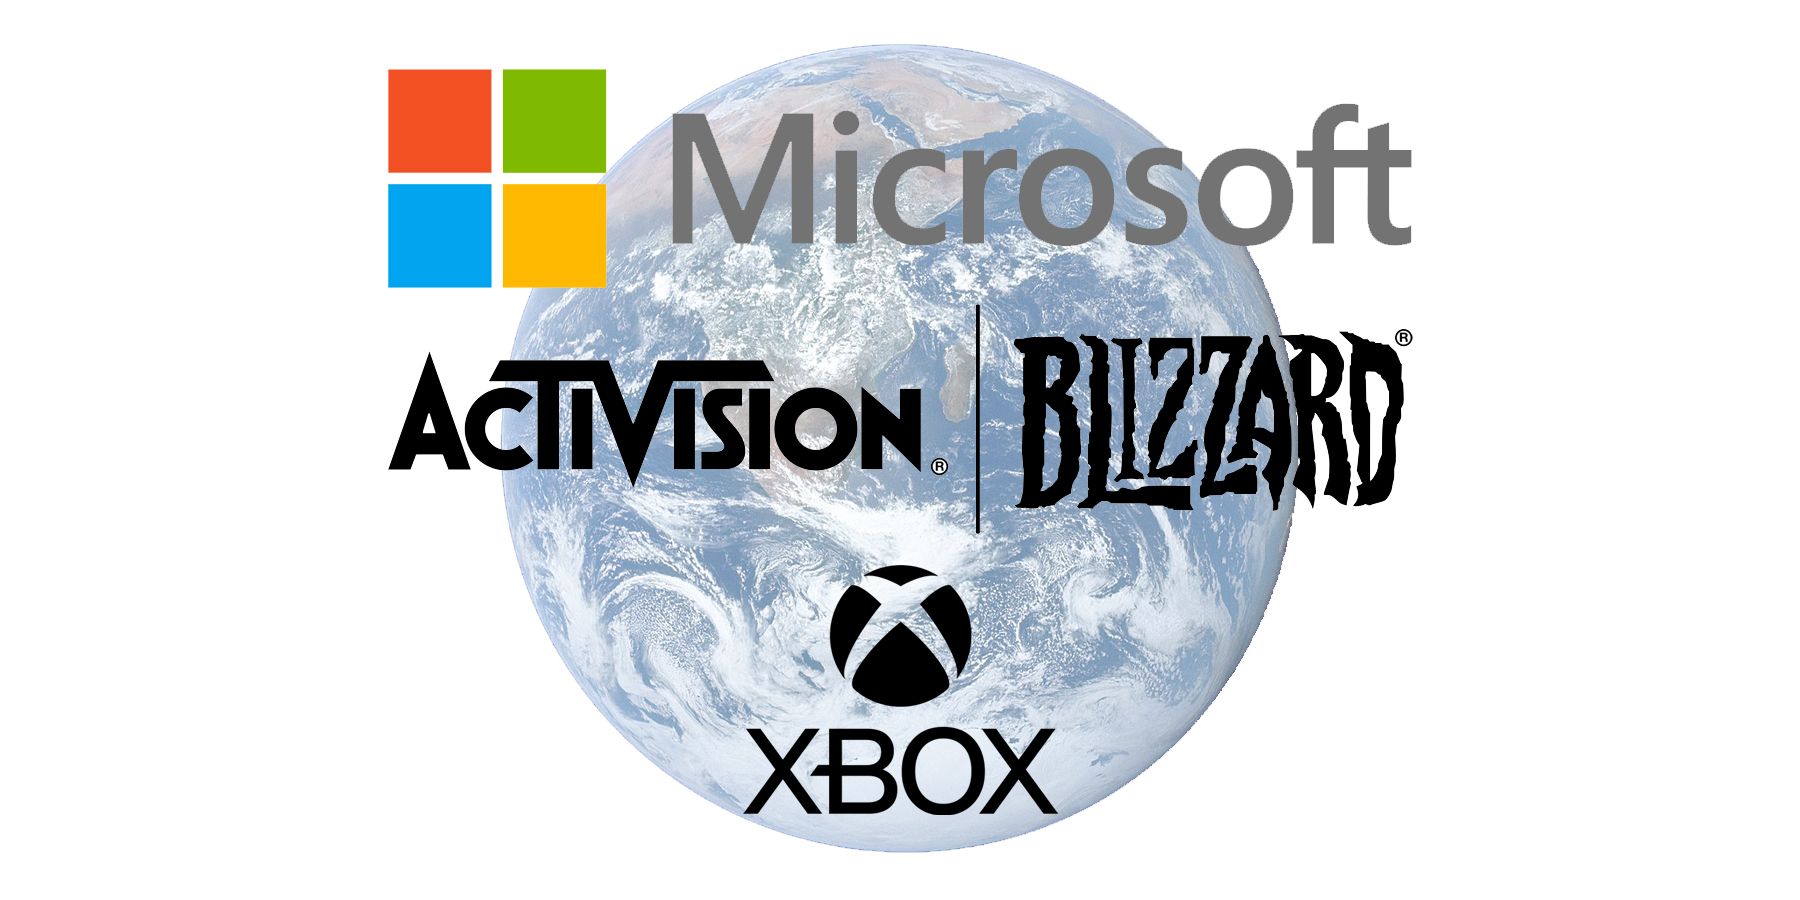 The Microsoft, Activision Blizzard, and Xbox text logos in front of the planet Earth.